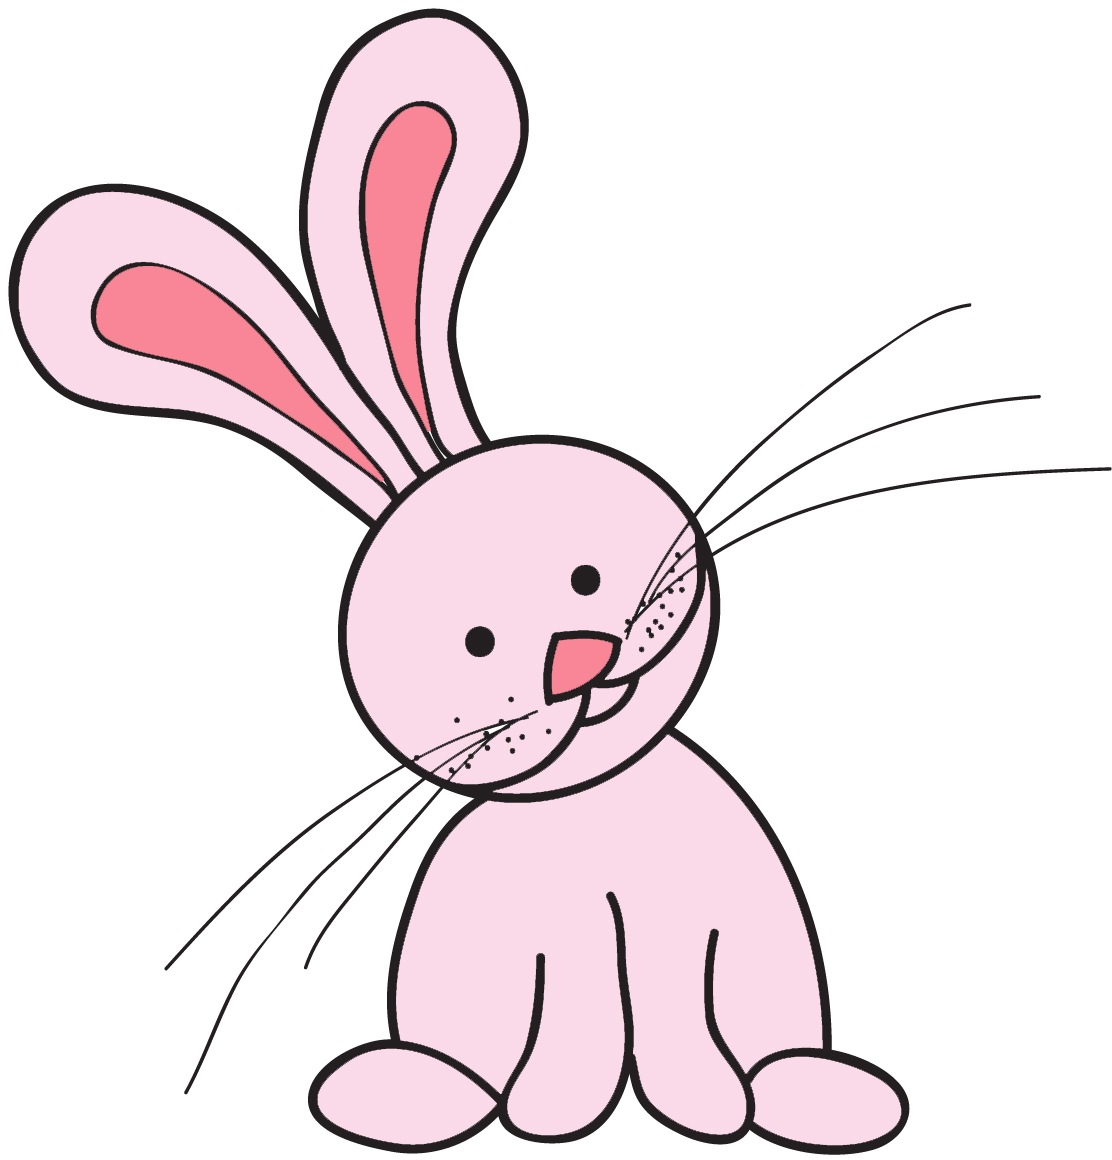 Cartoon Bunnies That Can Be Downloaded - ClipArt Best